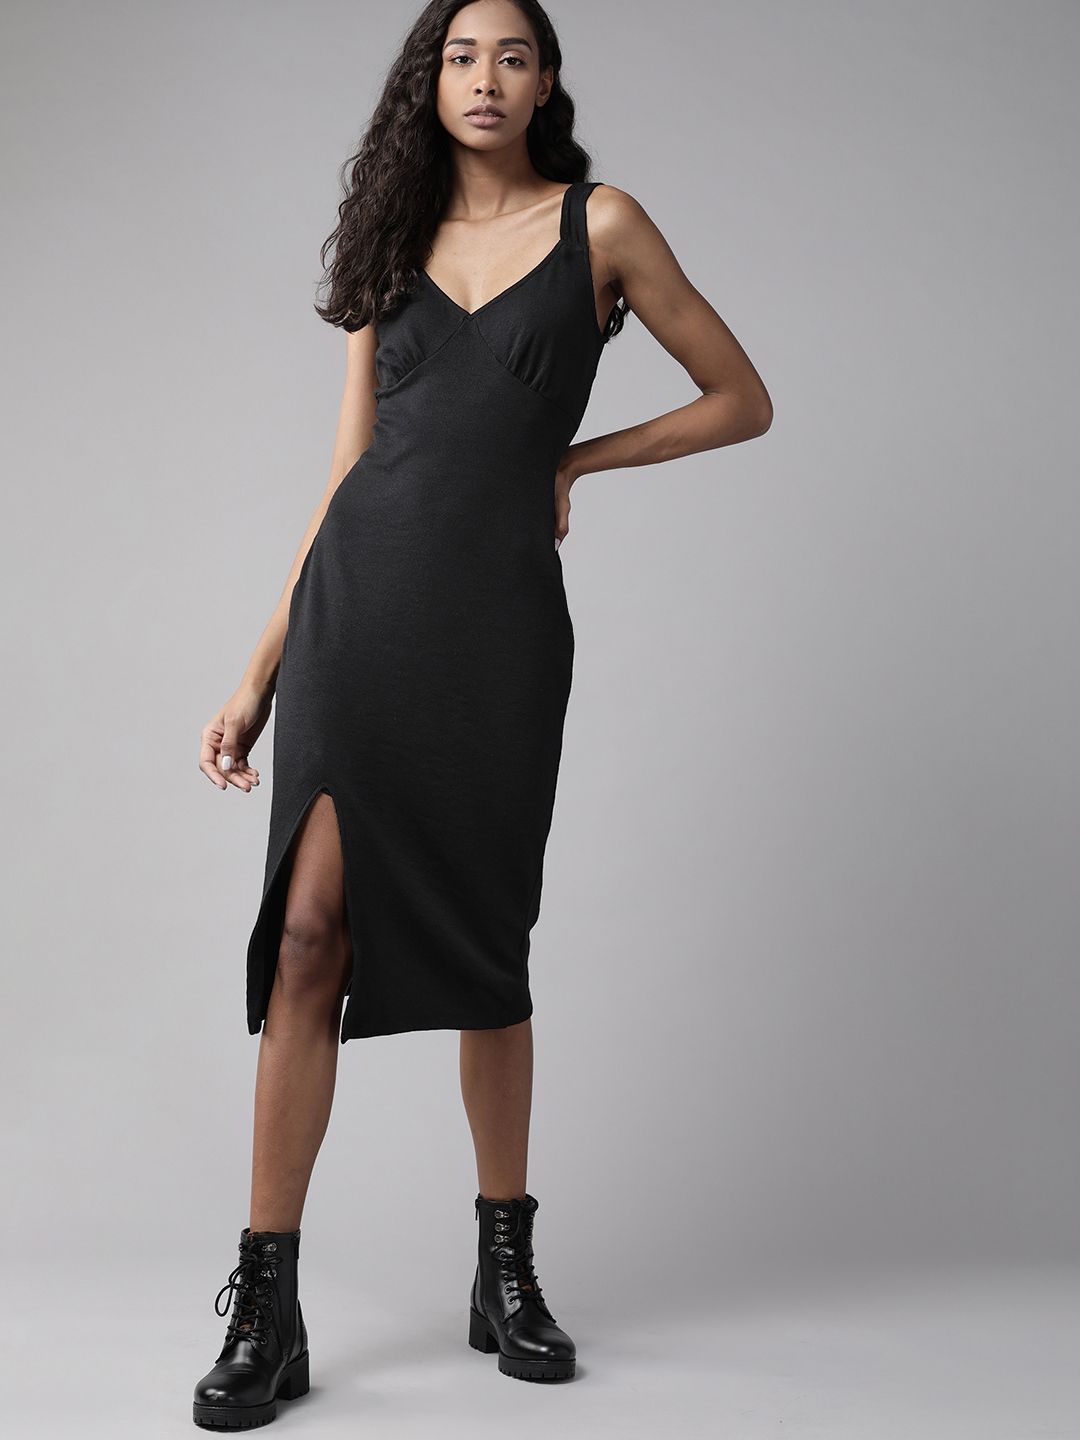 The Roadster Lifestyle Co Women Black Ribbed Sheath Dress Price in India